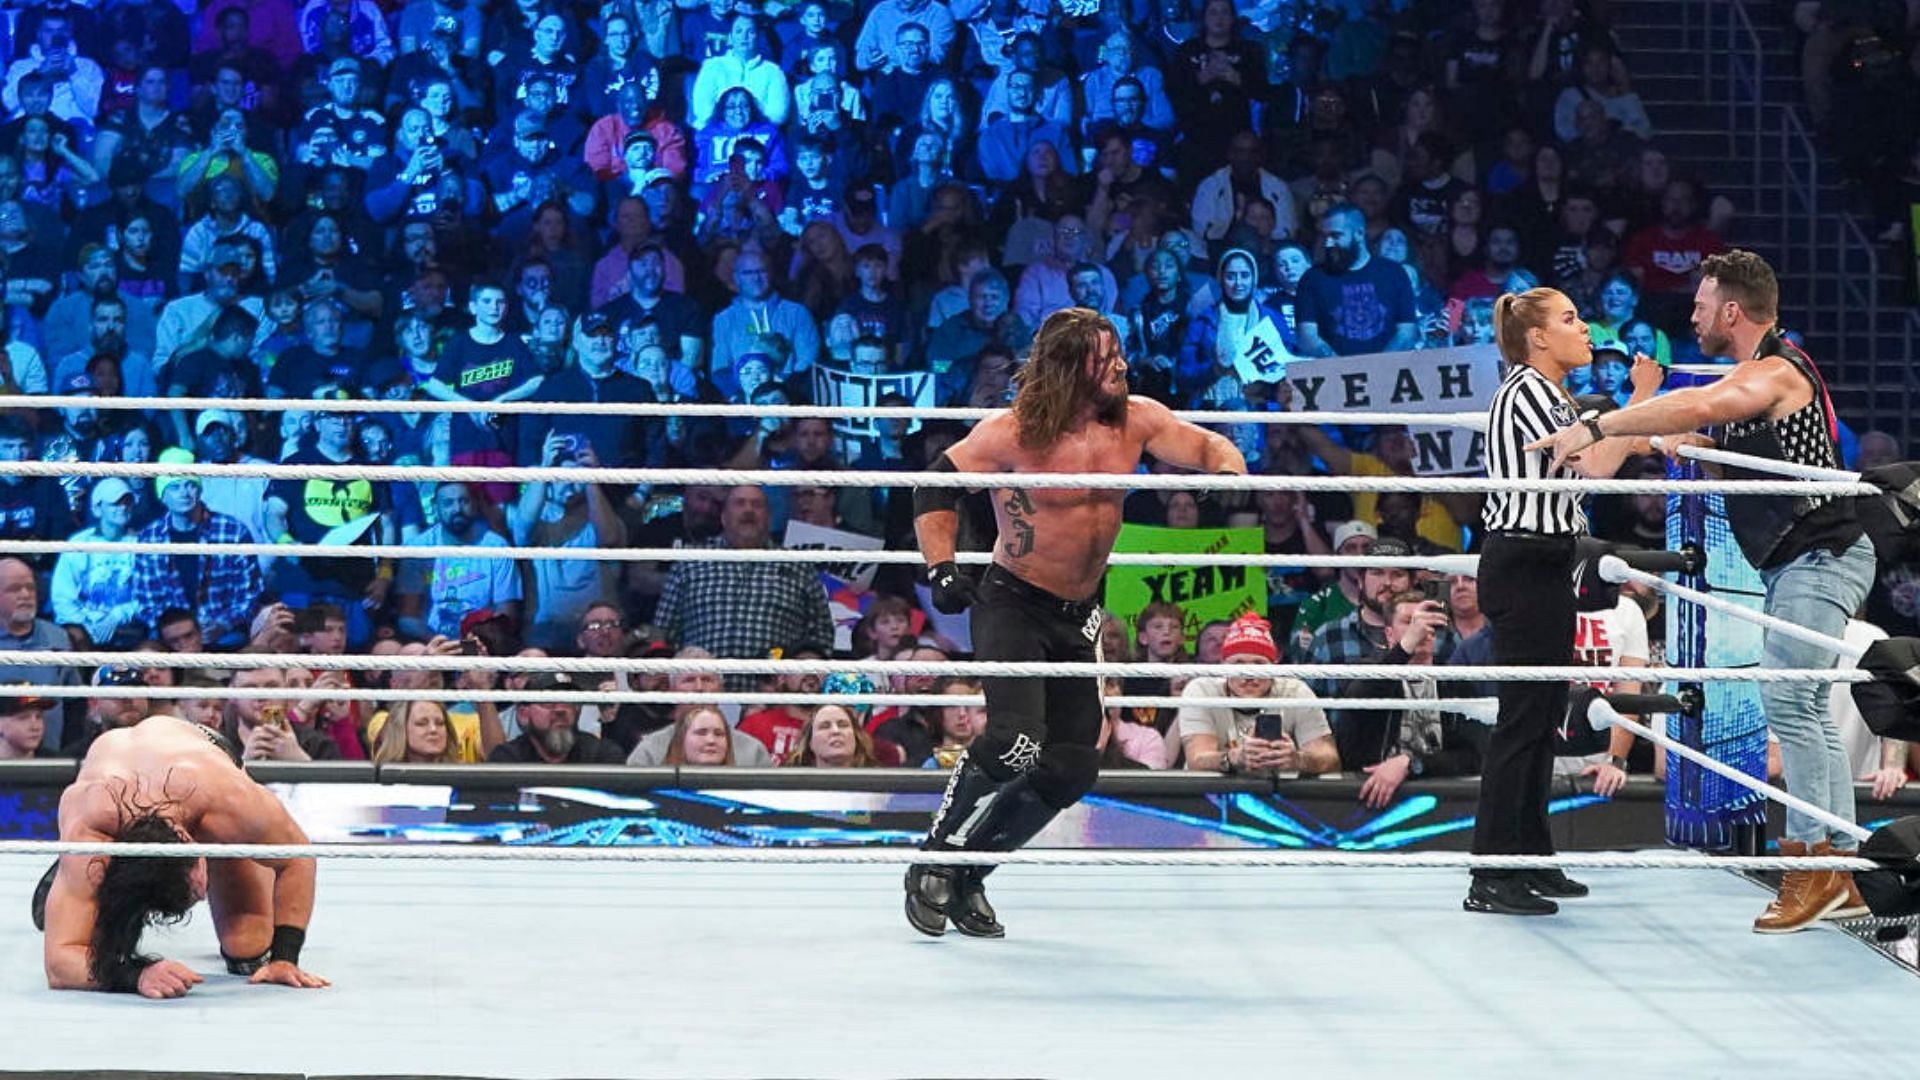 Things got pretty chaotic during SmackDown